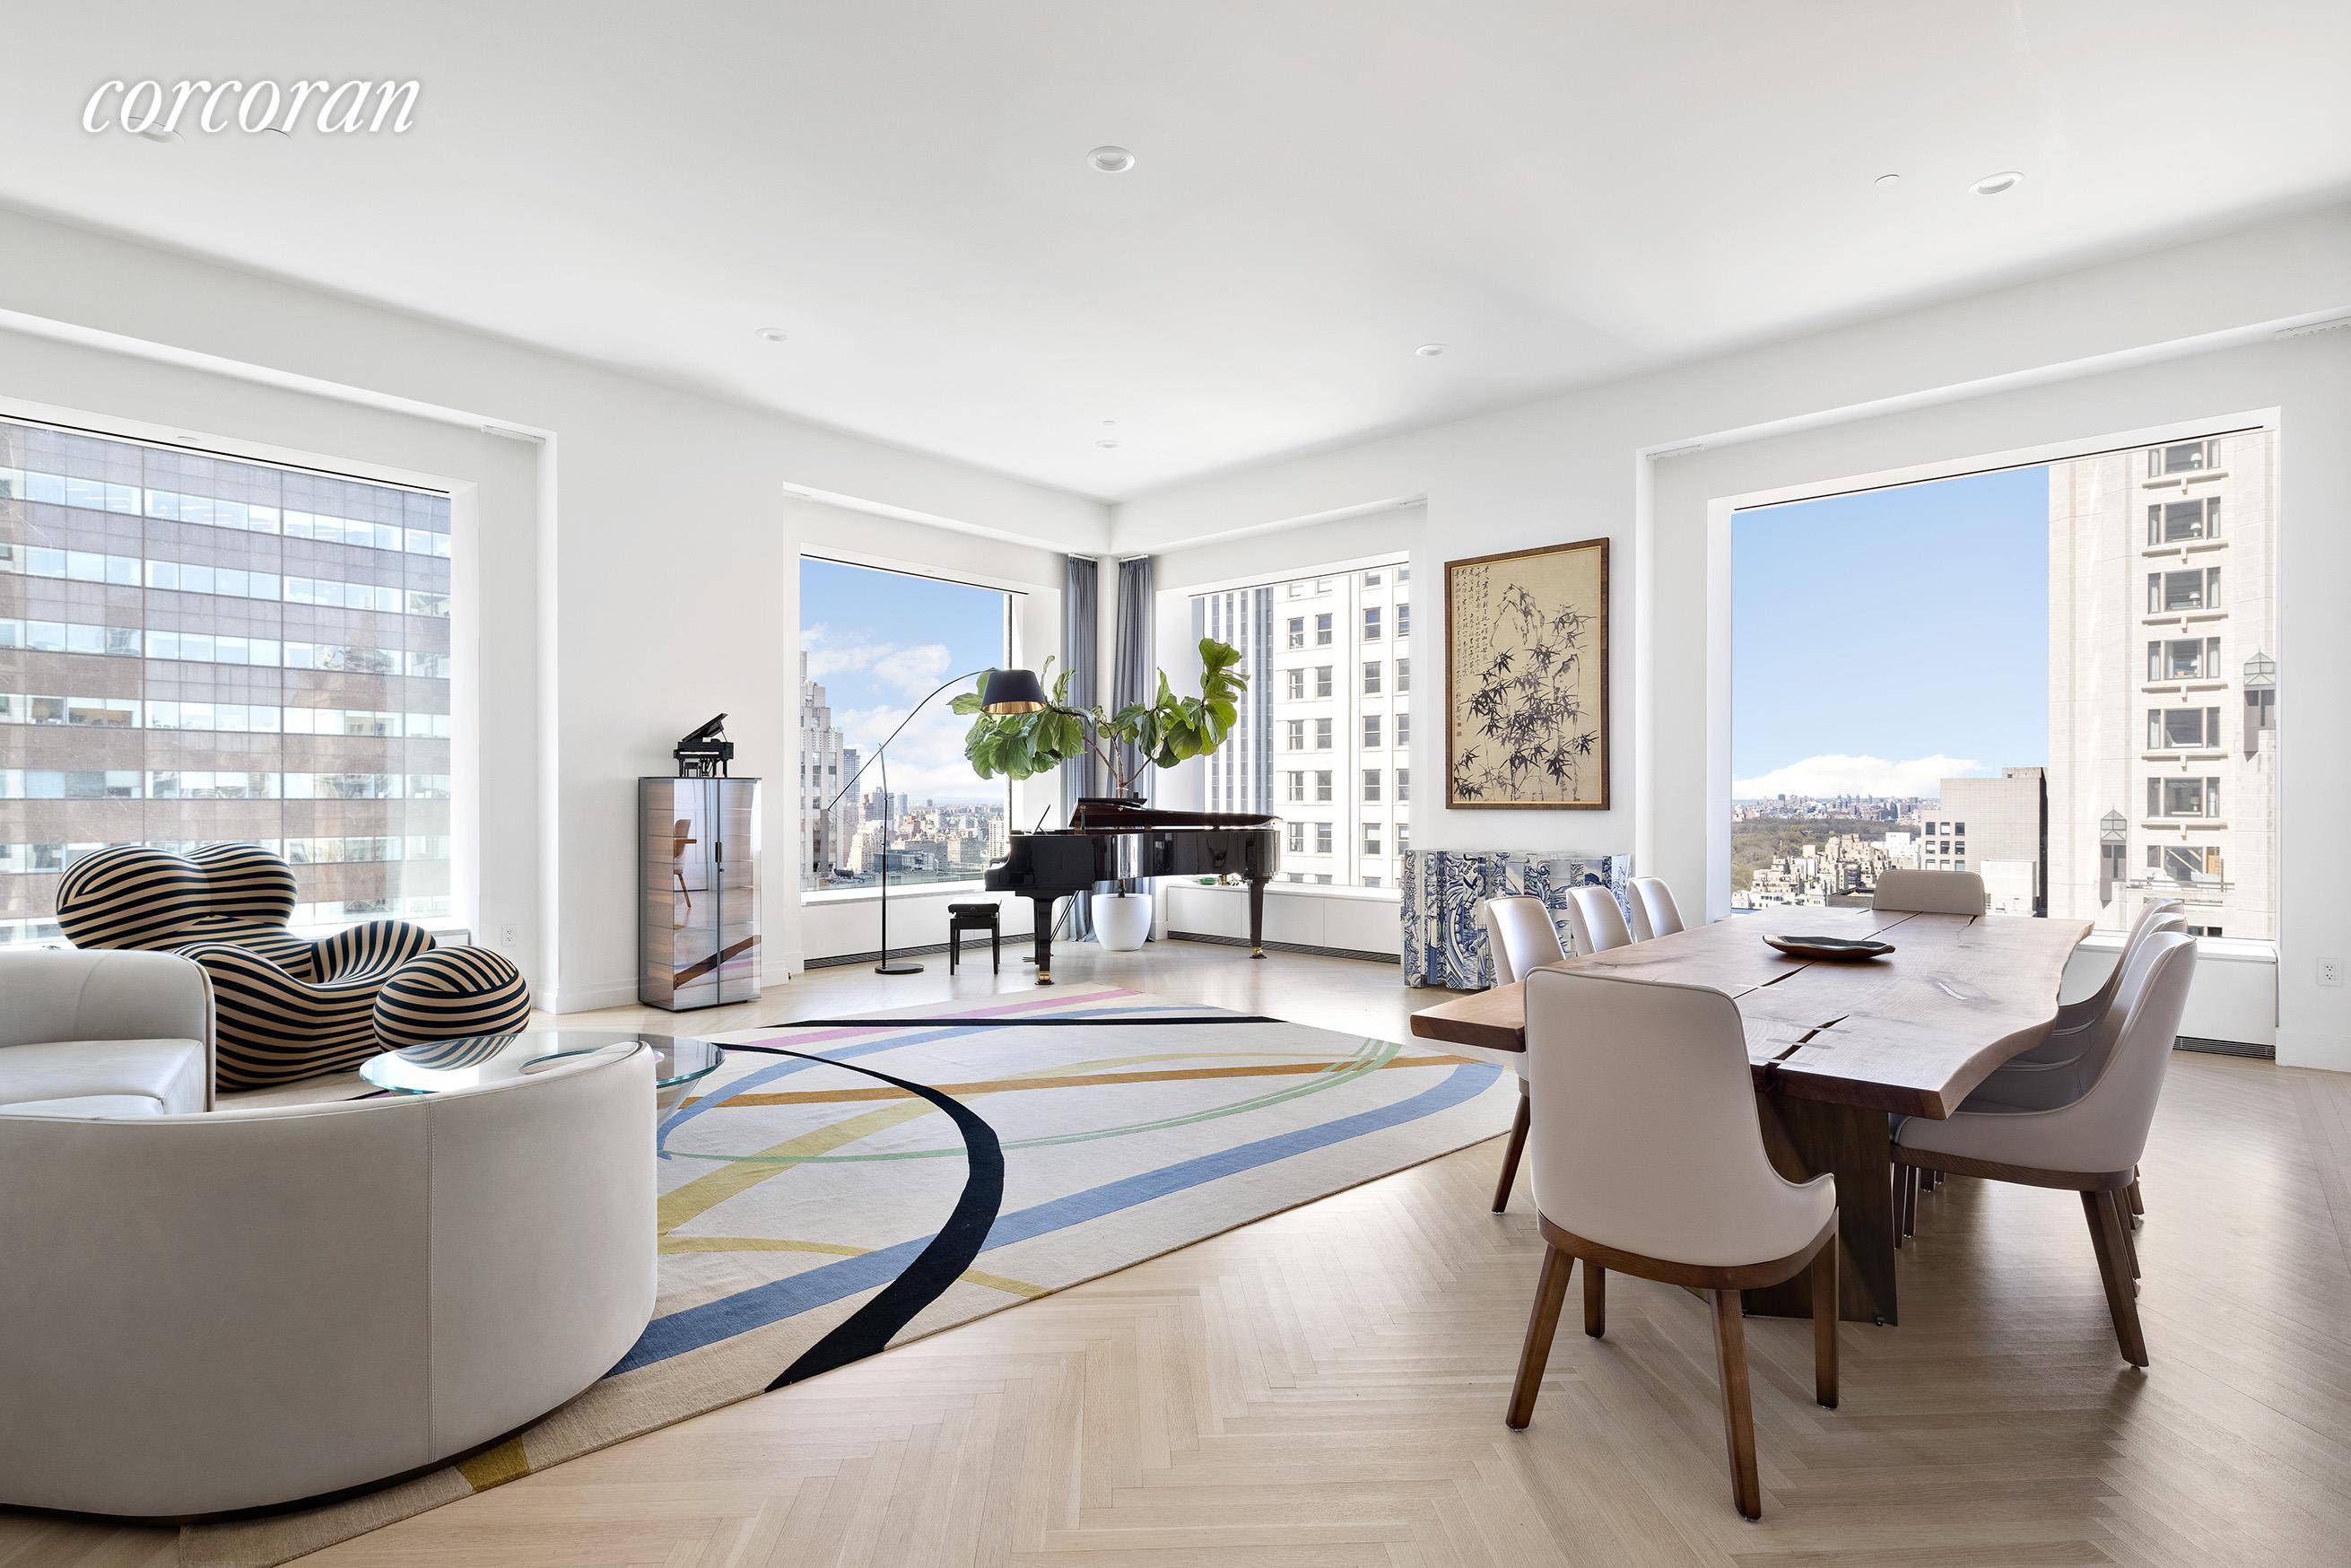 Residence 35B at 432 Park AvenueFour Bedrooms Four Baths Library Powder Room 4, 003 sqftResidence 35B at 432 Park Avenue is a half floor residence featuring a perfect balance of ...